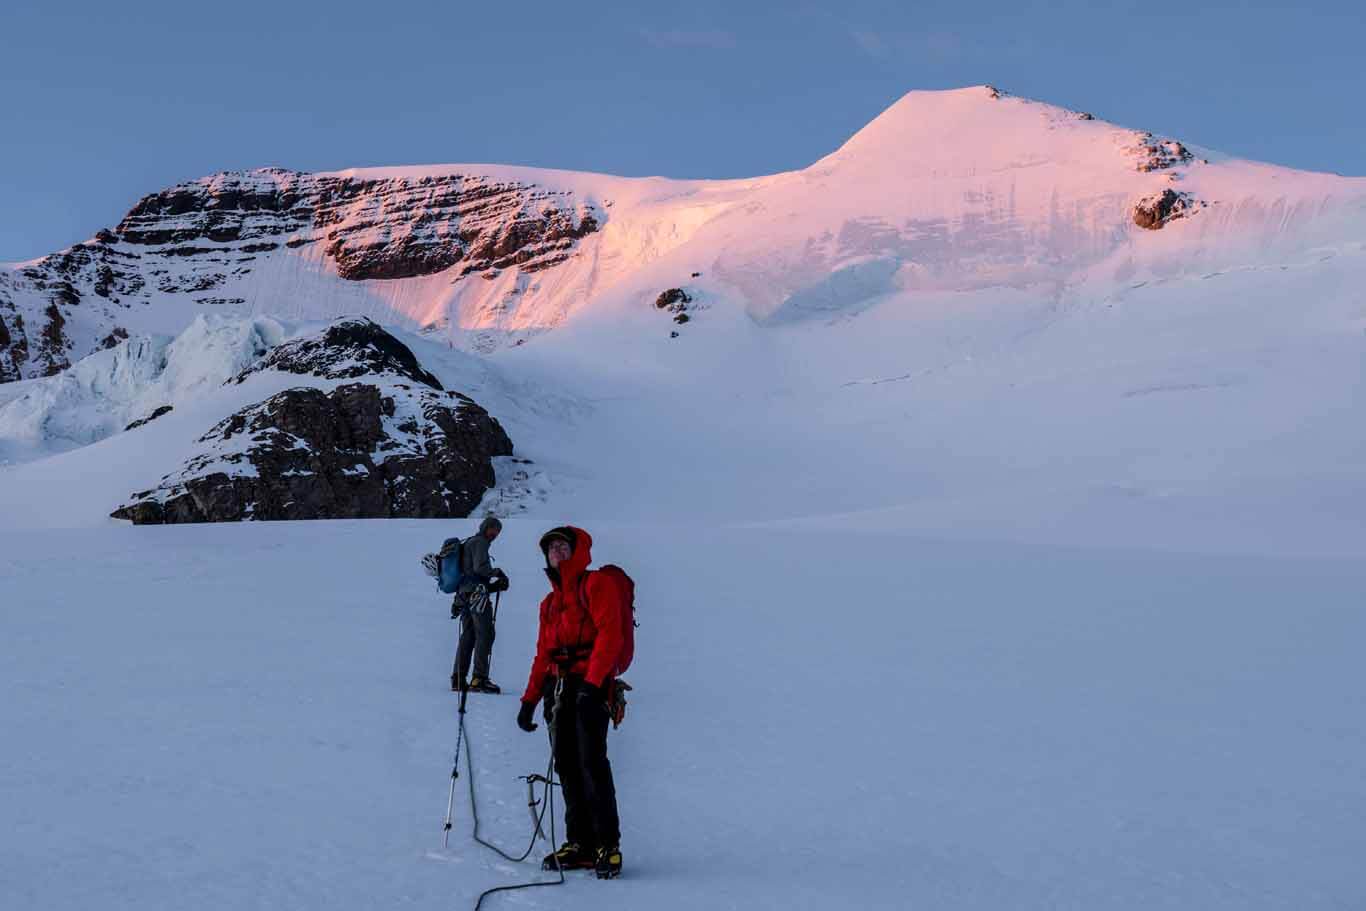 Tim Taylor guiding a client while alpine climbing in the Alberta Rocky Mountains with morning sun breaking on the ridge